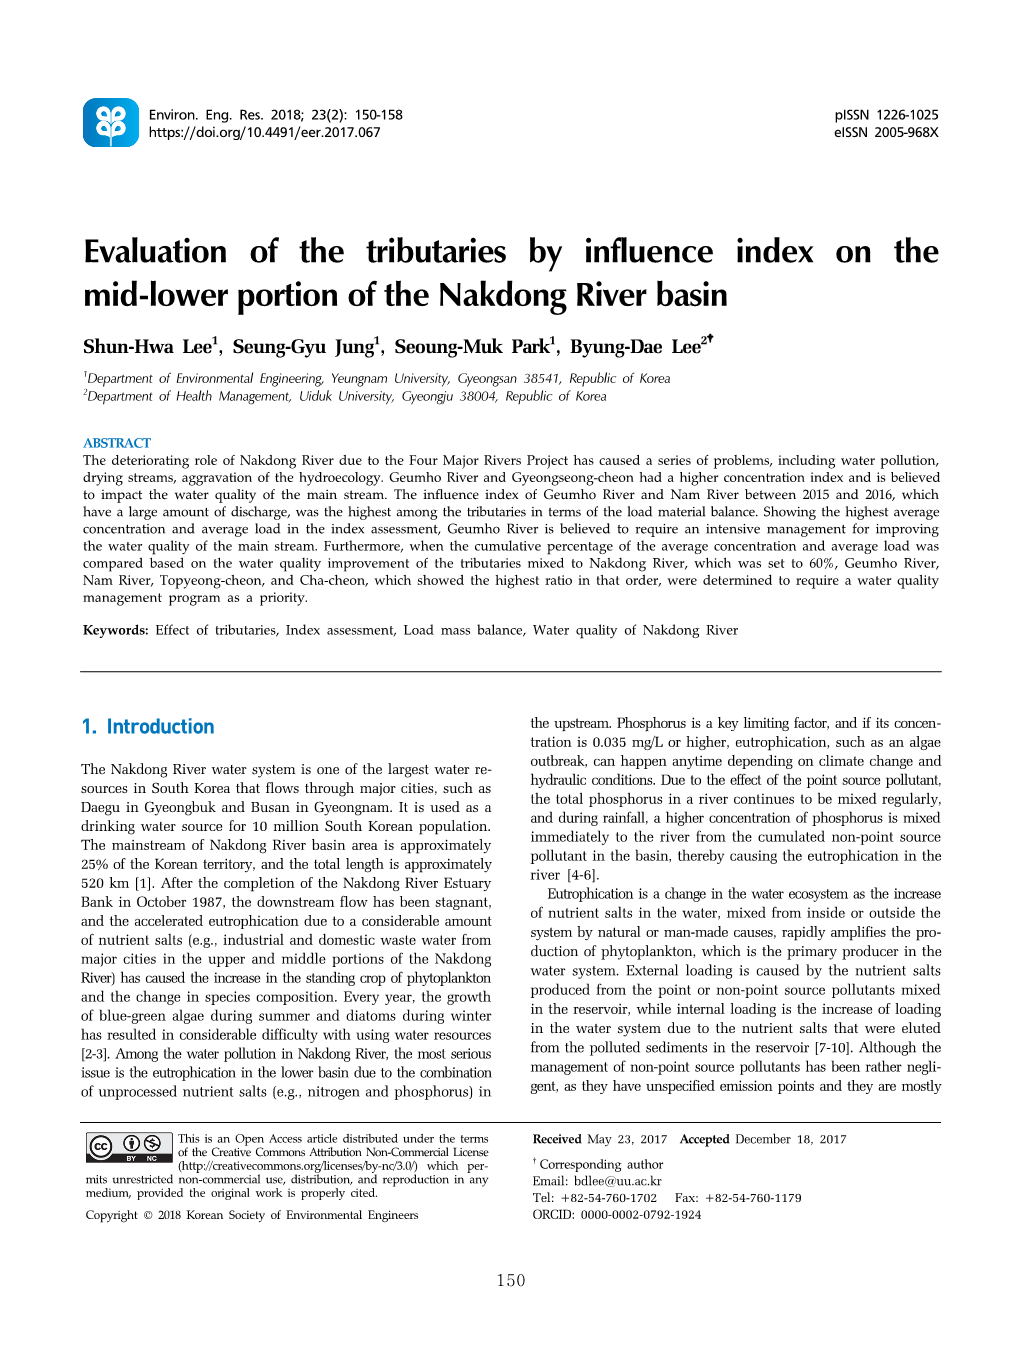 Evaluation of the Tributaries by Influence Index on the Mid-Lower Portion of the Nakdong River Basin